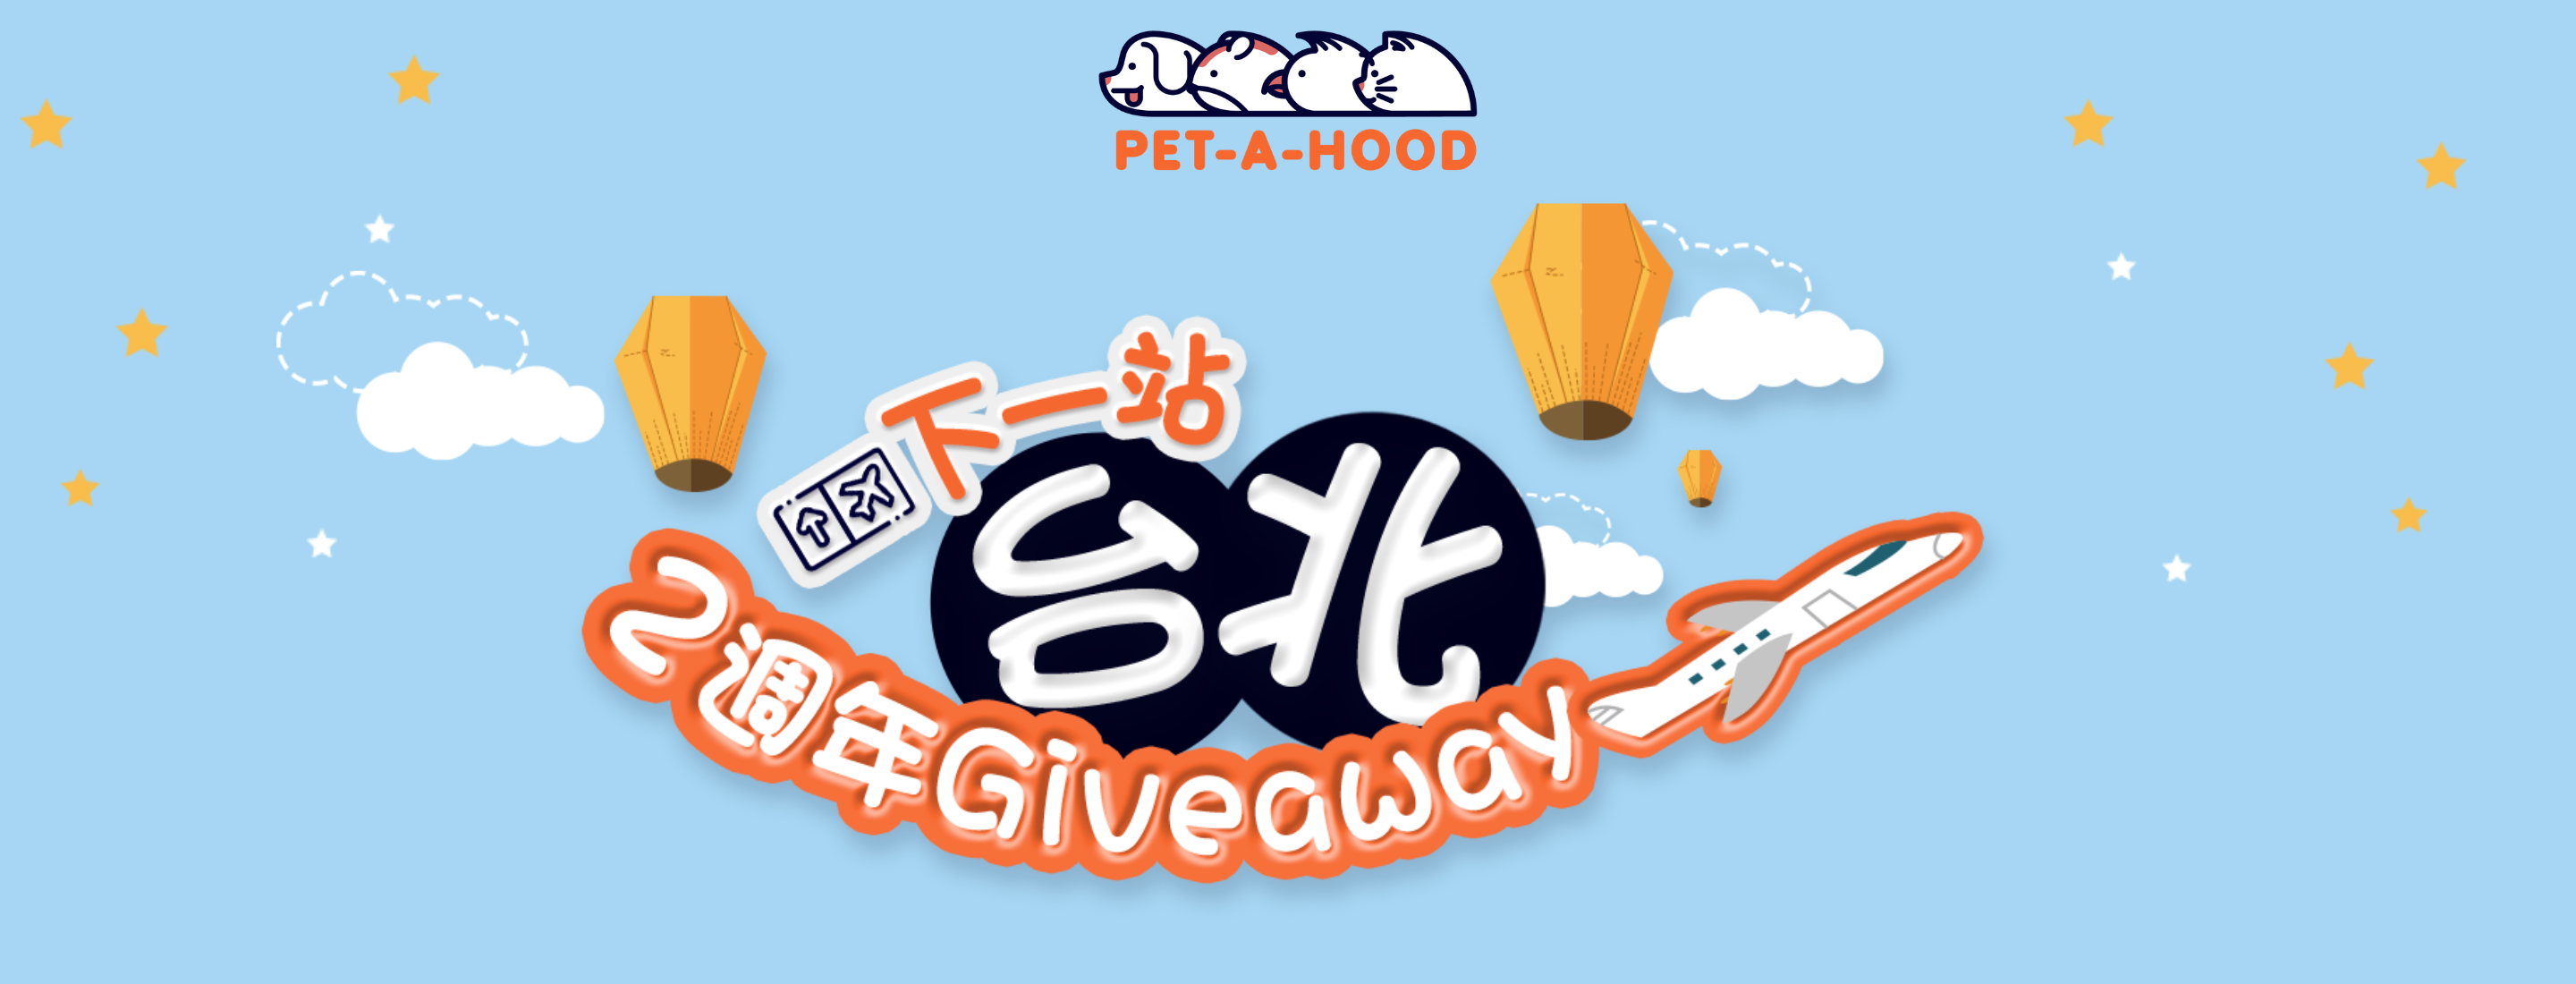 PET-A-HOOD 2nd Anniversary | Taipei Round Trip Air Ticket & Pet Show Ticket Giveaway